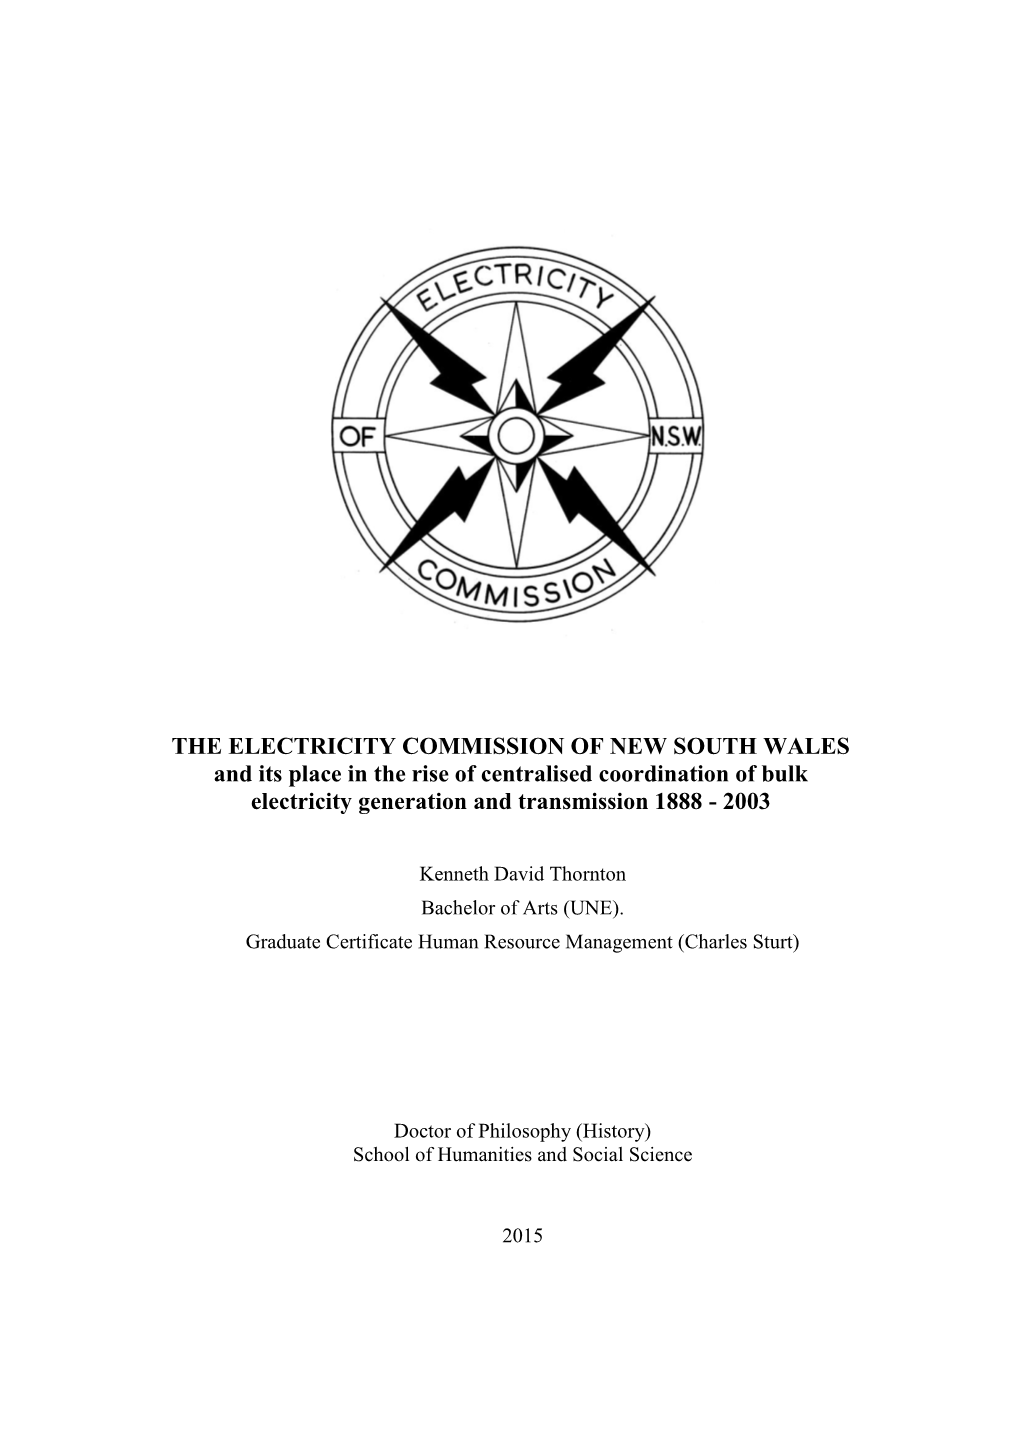 THE ELECTRICITY COMMISSION of NEW SOUTH WALES and Its Place in the Rise of Centralised Coordination of Bulk Electricity Generation and Transmission 1888 - 2003